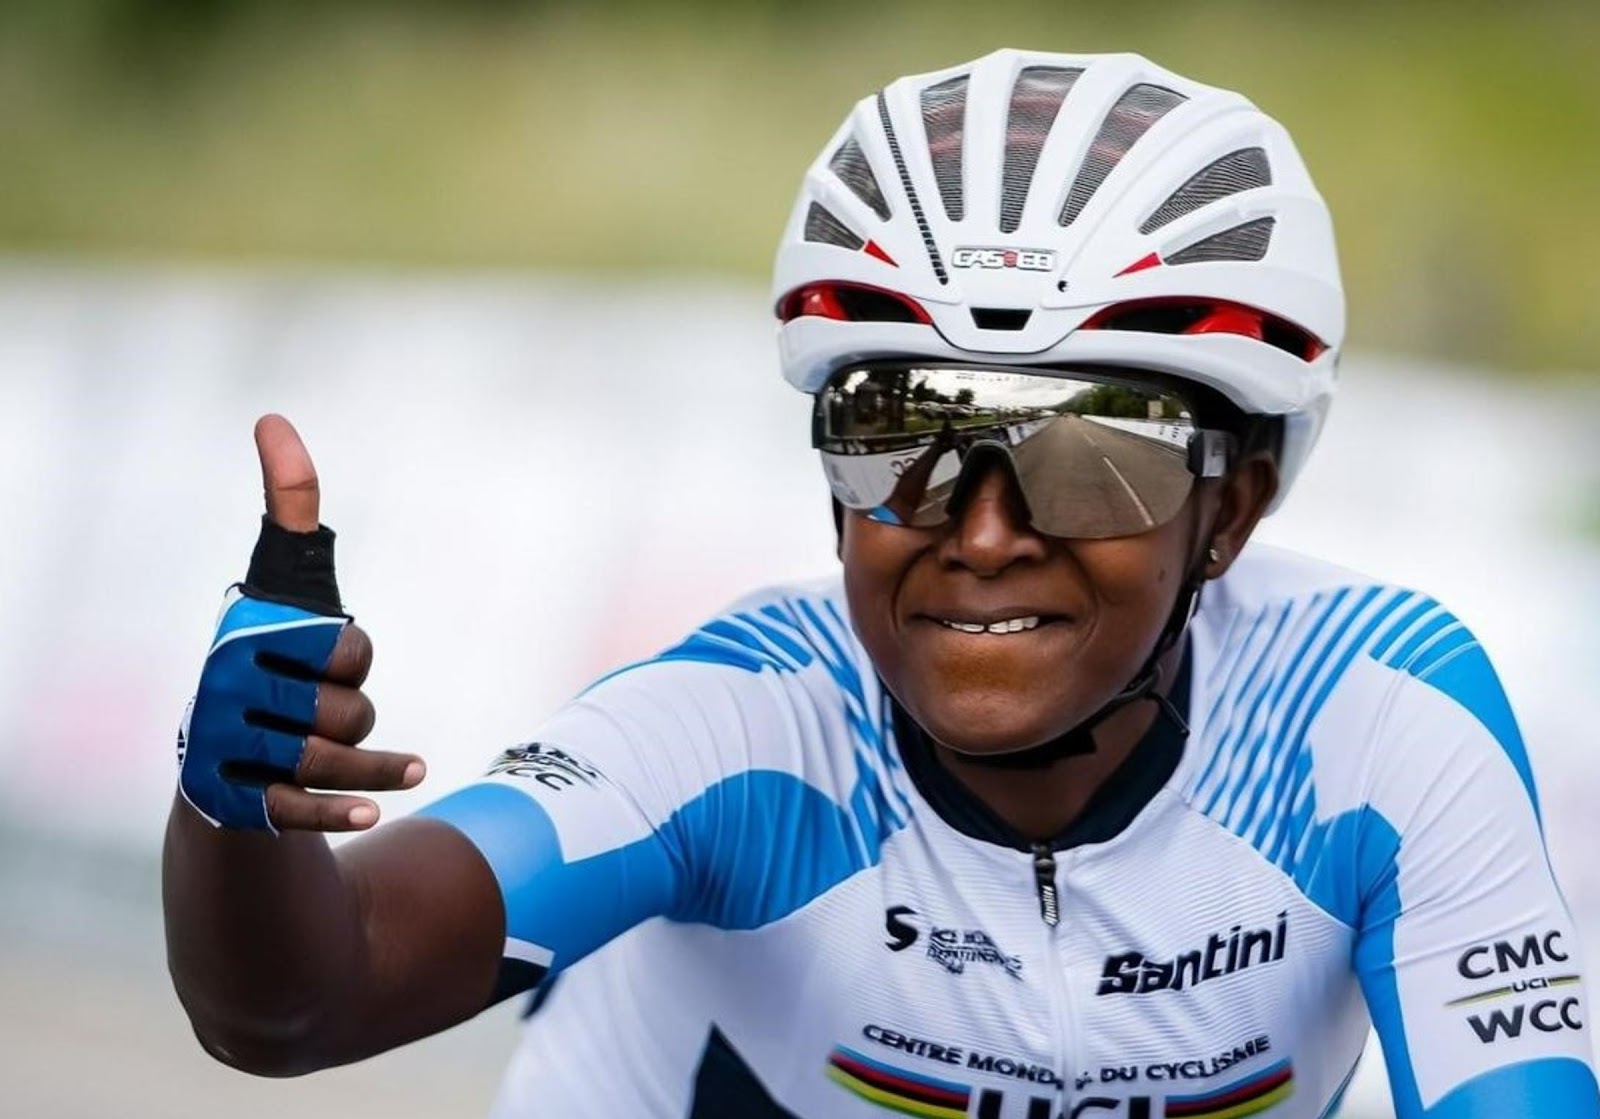 Racing From The View Of UCI World Cycling Center’s Three Team Members. Ethiopia's Selam Amha Gerefiel (24) 